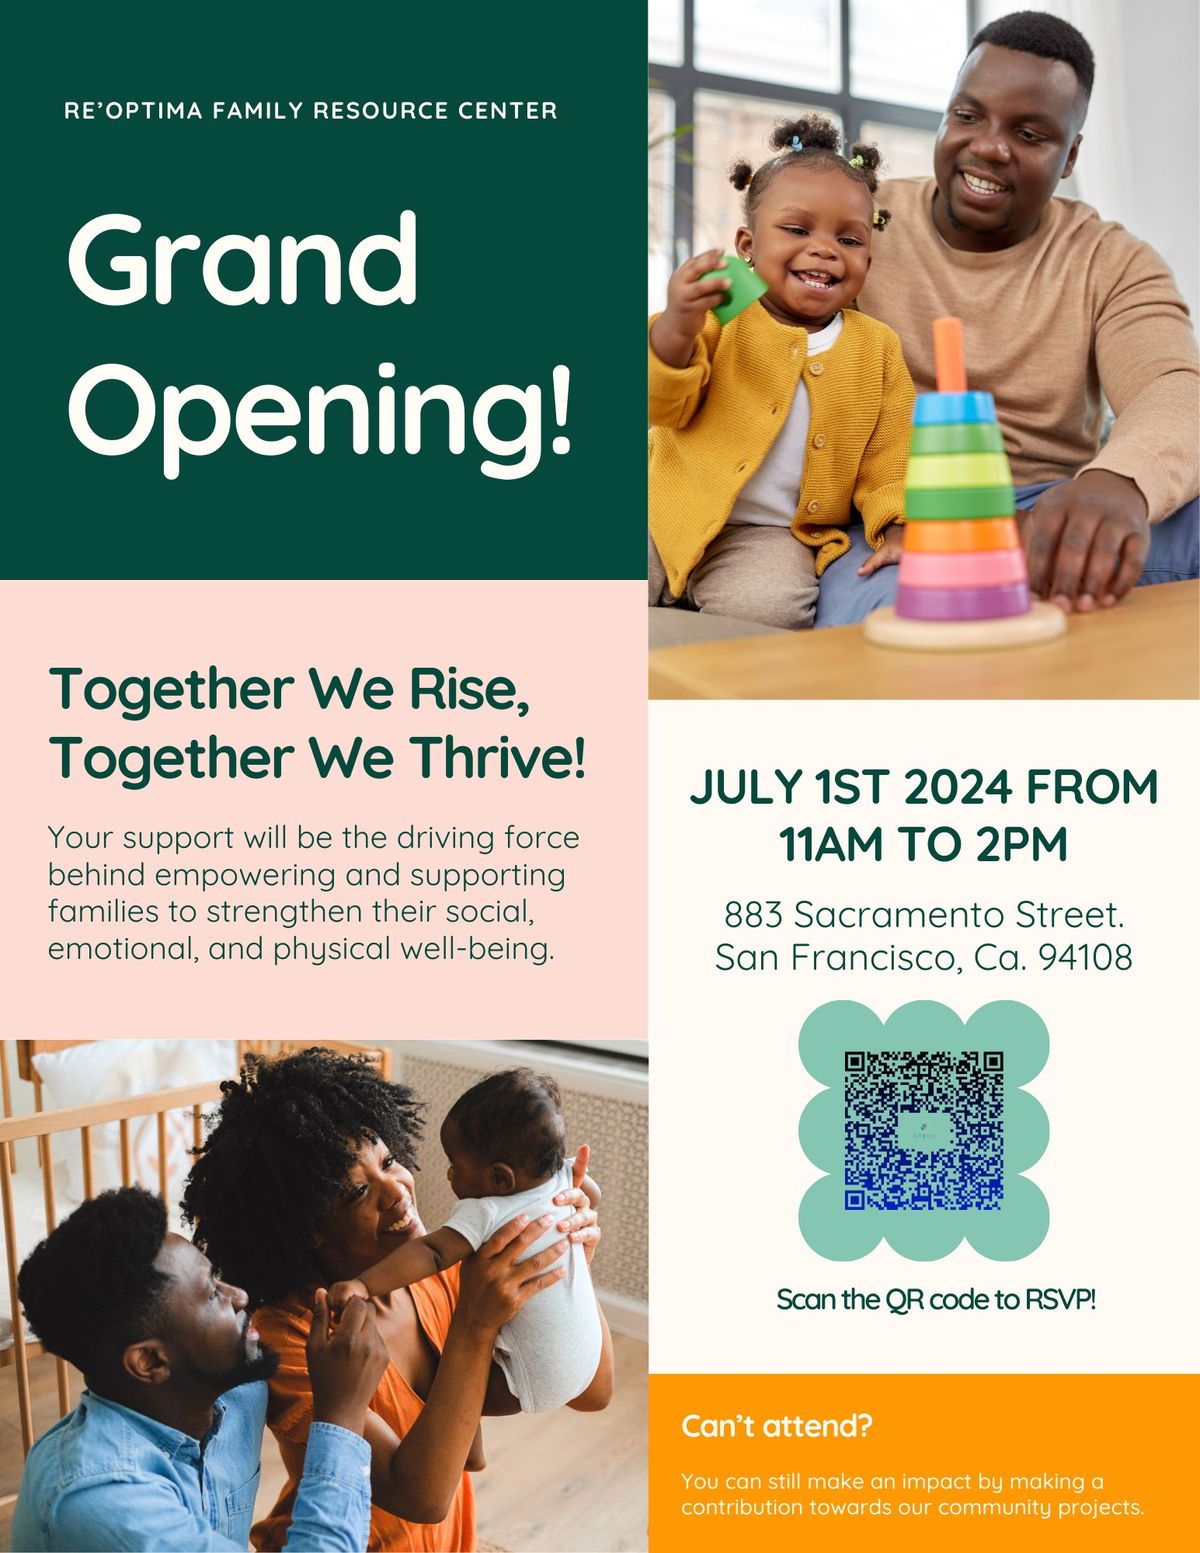 Grand Opening for Re'Optima Family Resource Center